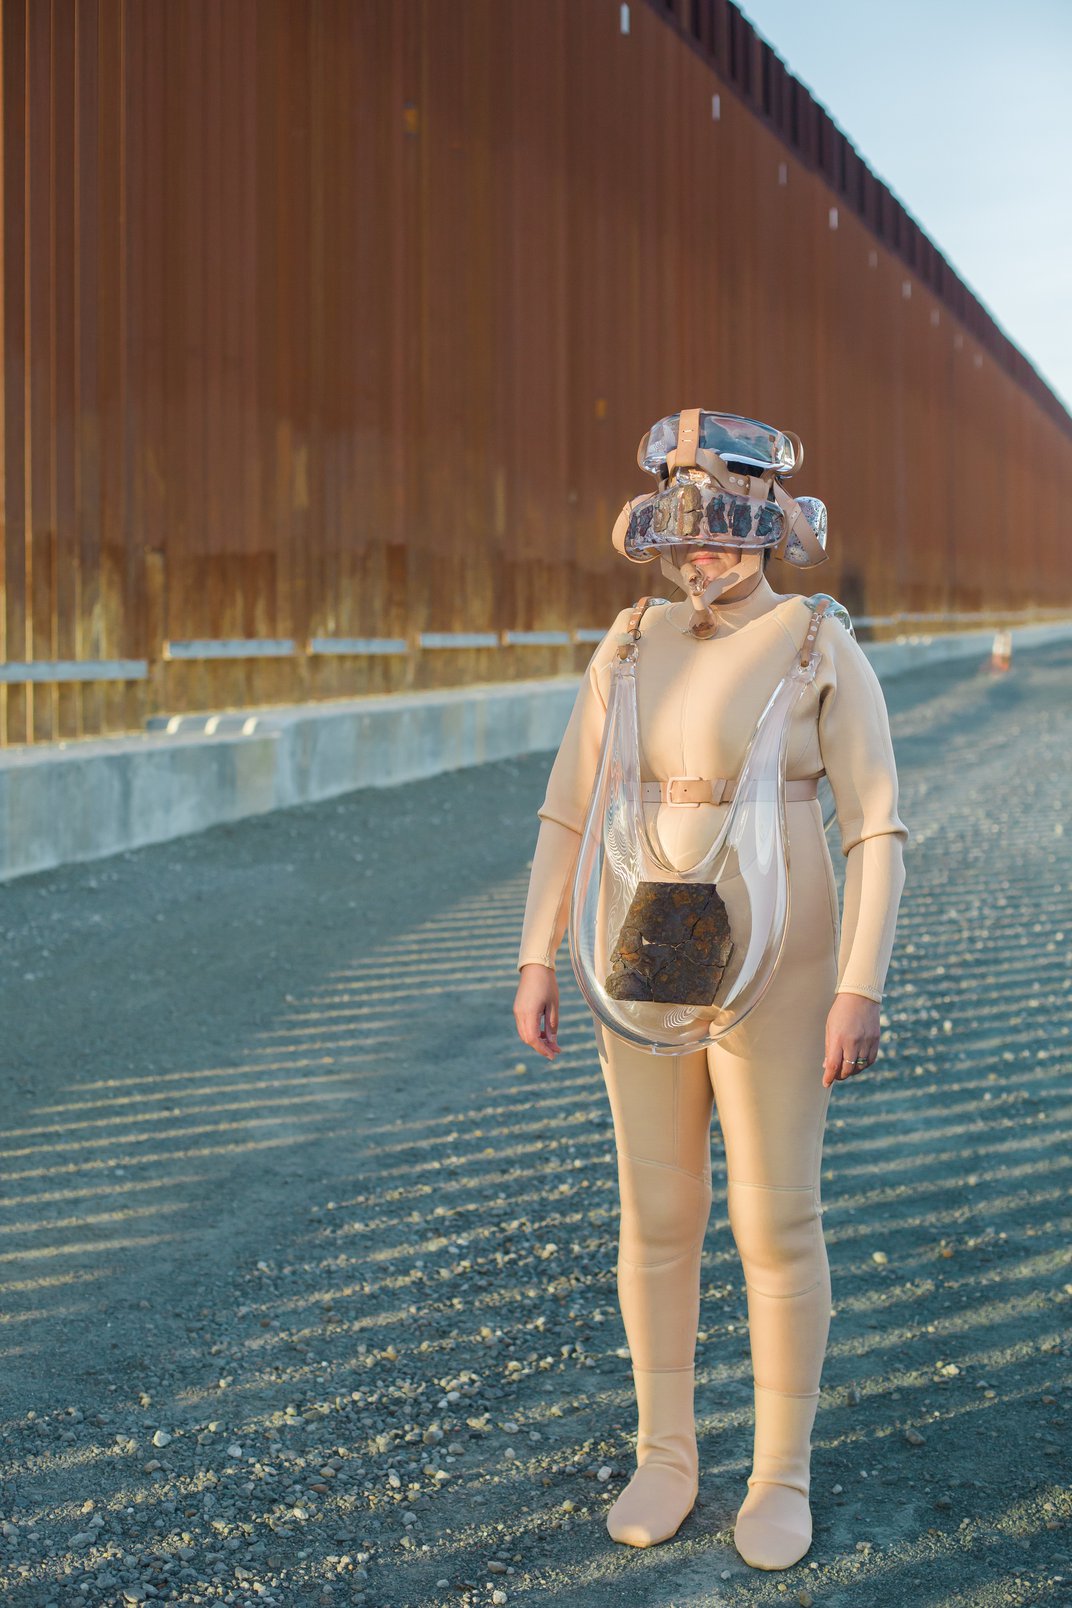 Artist Tanya Aguiniga standing in a suit made of various glass elements next to the U.S./ Mexico border wall.